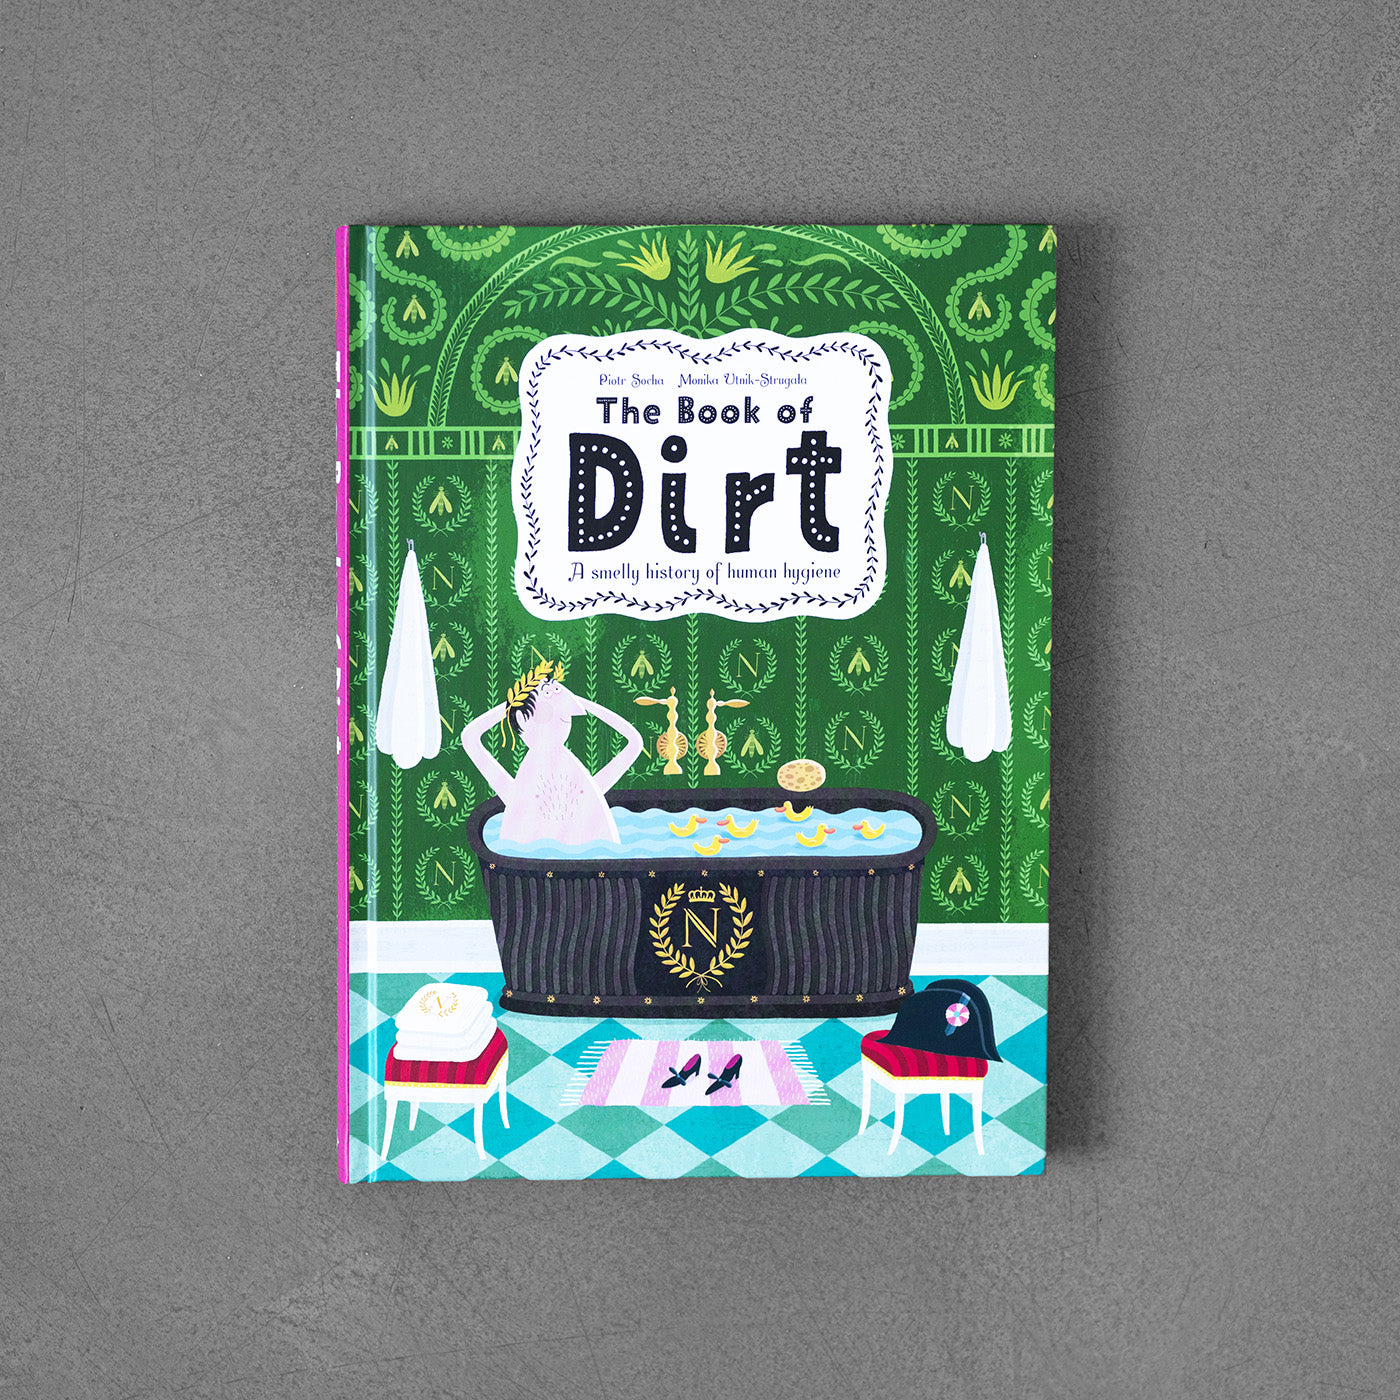 Book of Dirt: A Smelly History of Dirt, Disease and Human Hygiene